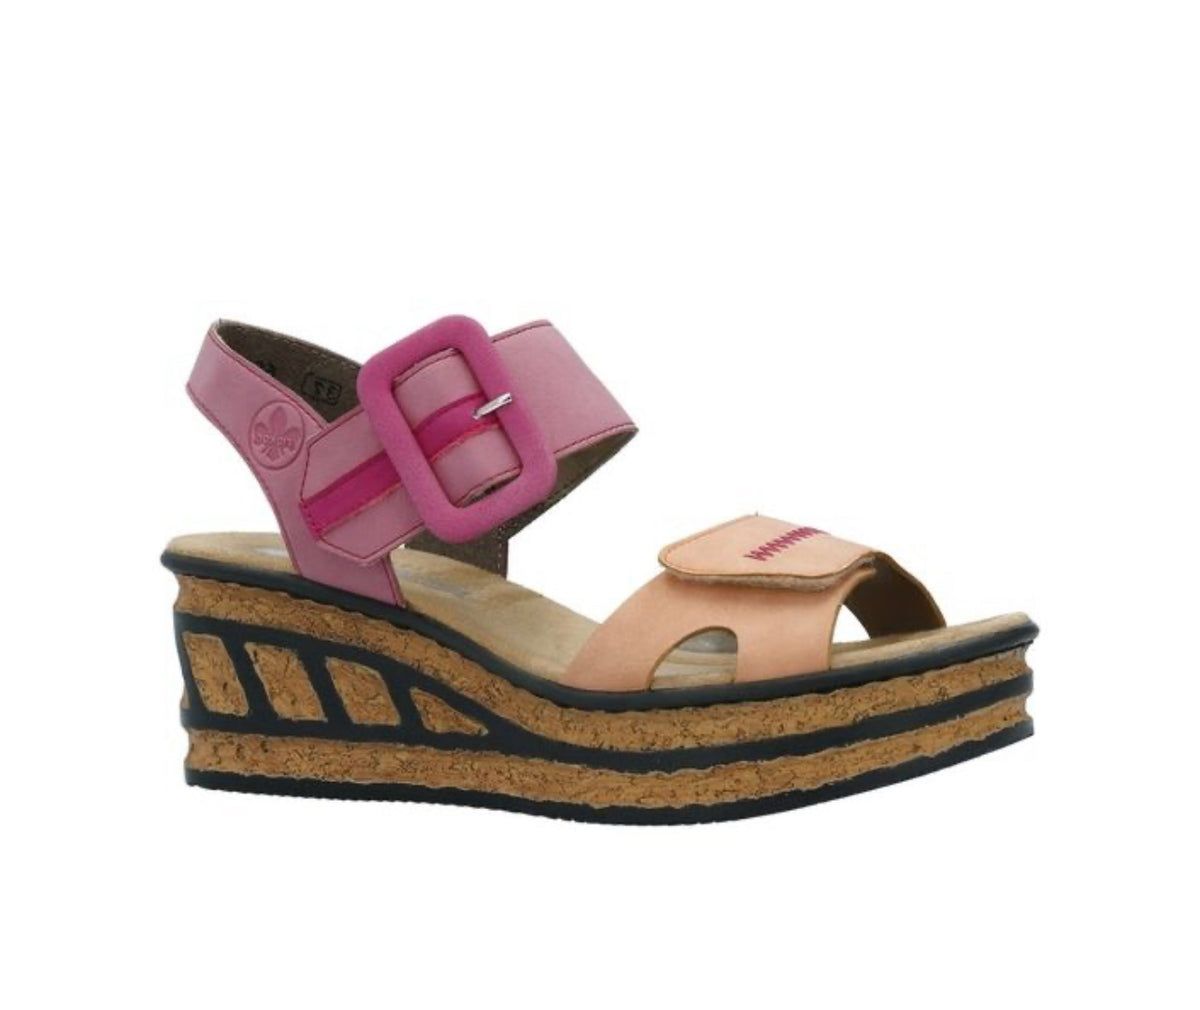 Rieker - 68176 Pink and Apricot Wedge Sandal